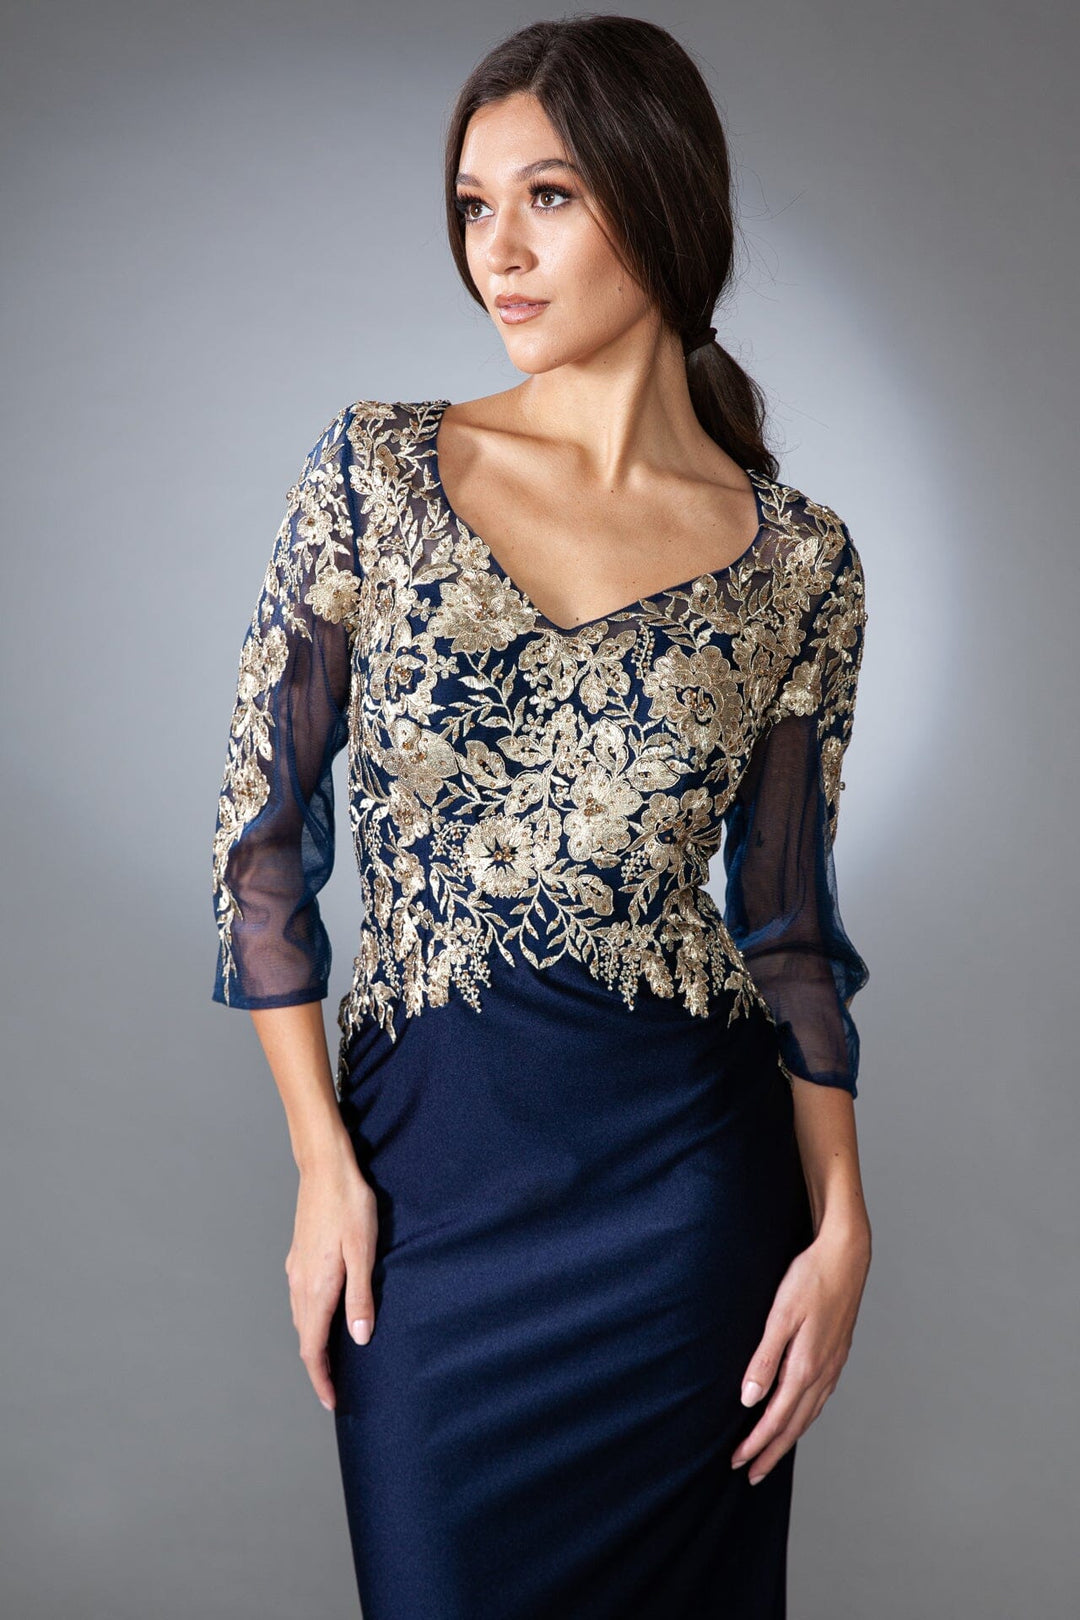 Floral Applique 3/4 Sleeve Gown by Amelia Couture 7039